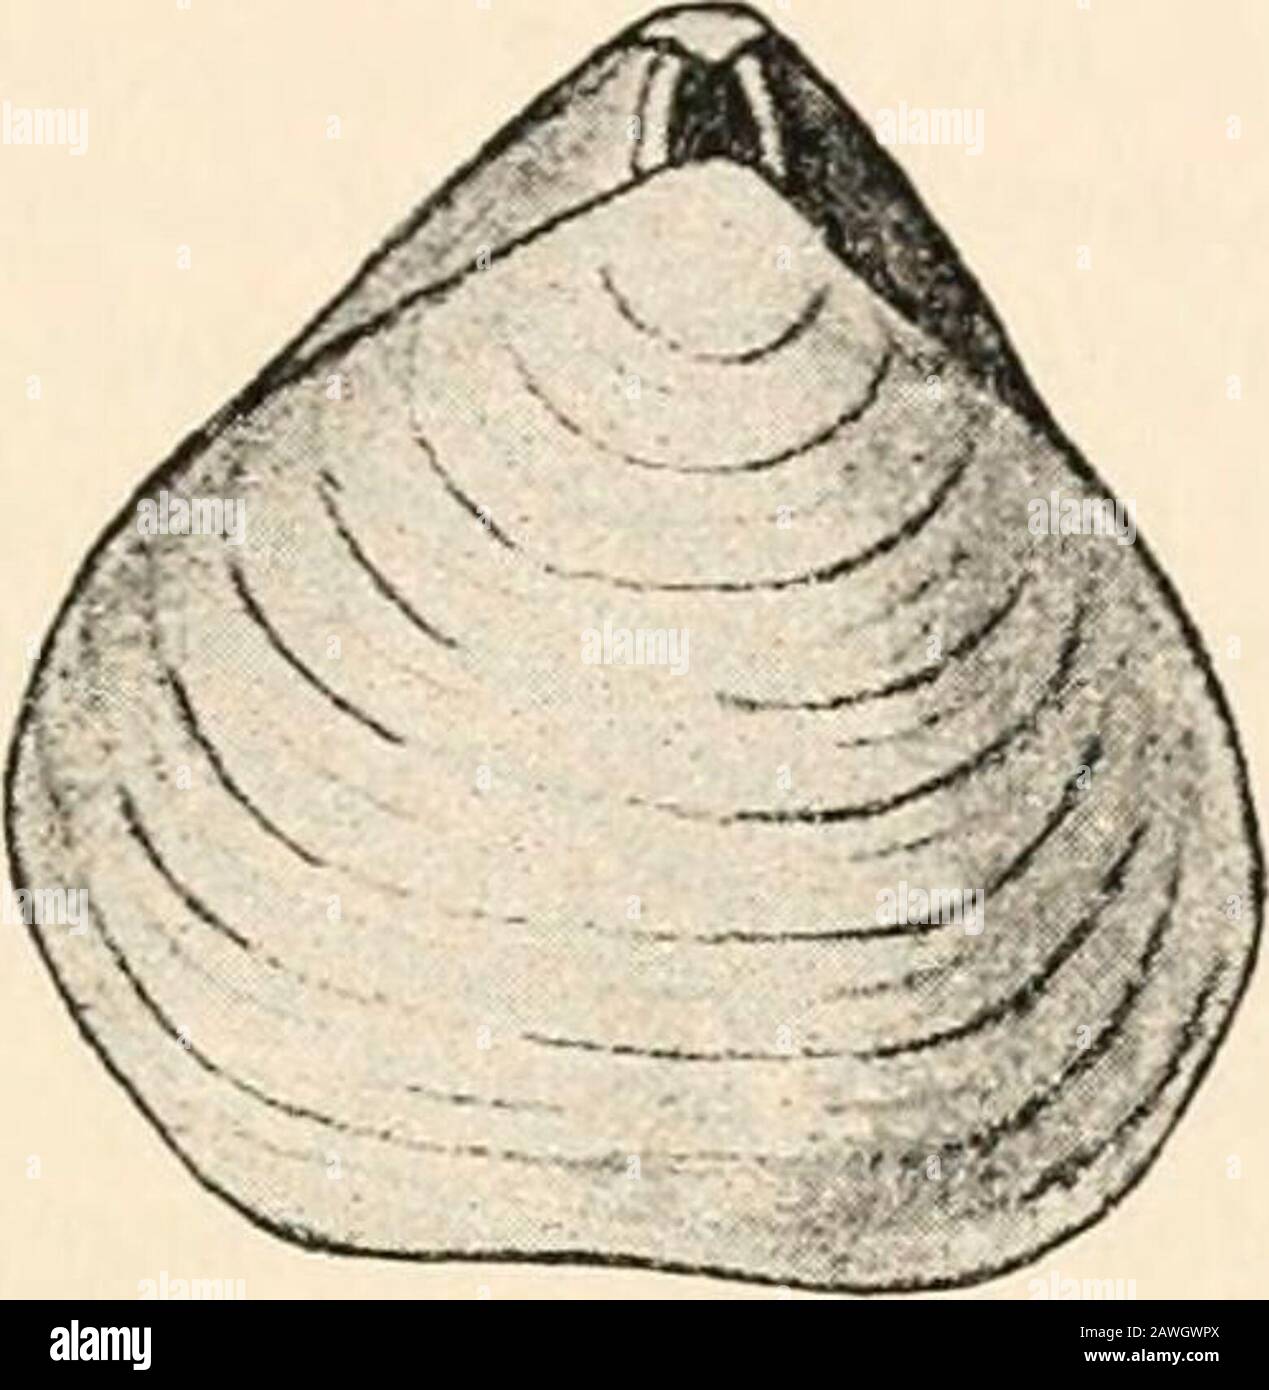 Text-book of comparative anatomy . cuticle; in Phoronis it is delicate,and the skin therefore secretes a detached chitinous envelope, whichserves as a dwelling tube. The Bryozoa generally form a rough hardcuticle (cell, ectocyst) whose aperture can be closed by a cover, andwhich often calcifies. In a similar way the mantle of the Brachiopodasecretes a bivalve shell which is generally calcareous, less frequentlyhorny. This shell of the Brachiopoda (Fig. 125) cannot be comparedwith the similarly bivalved shell of the Mussel (Lamellibranchiata,Cochlidce). The two shell valves of the former are do Stock Photo